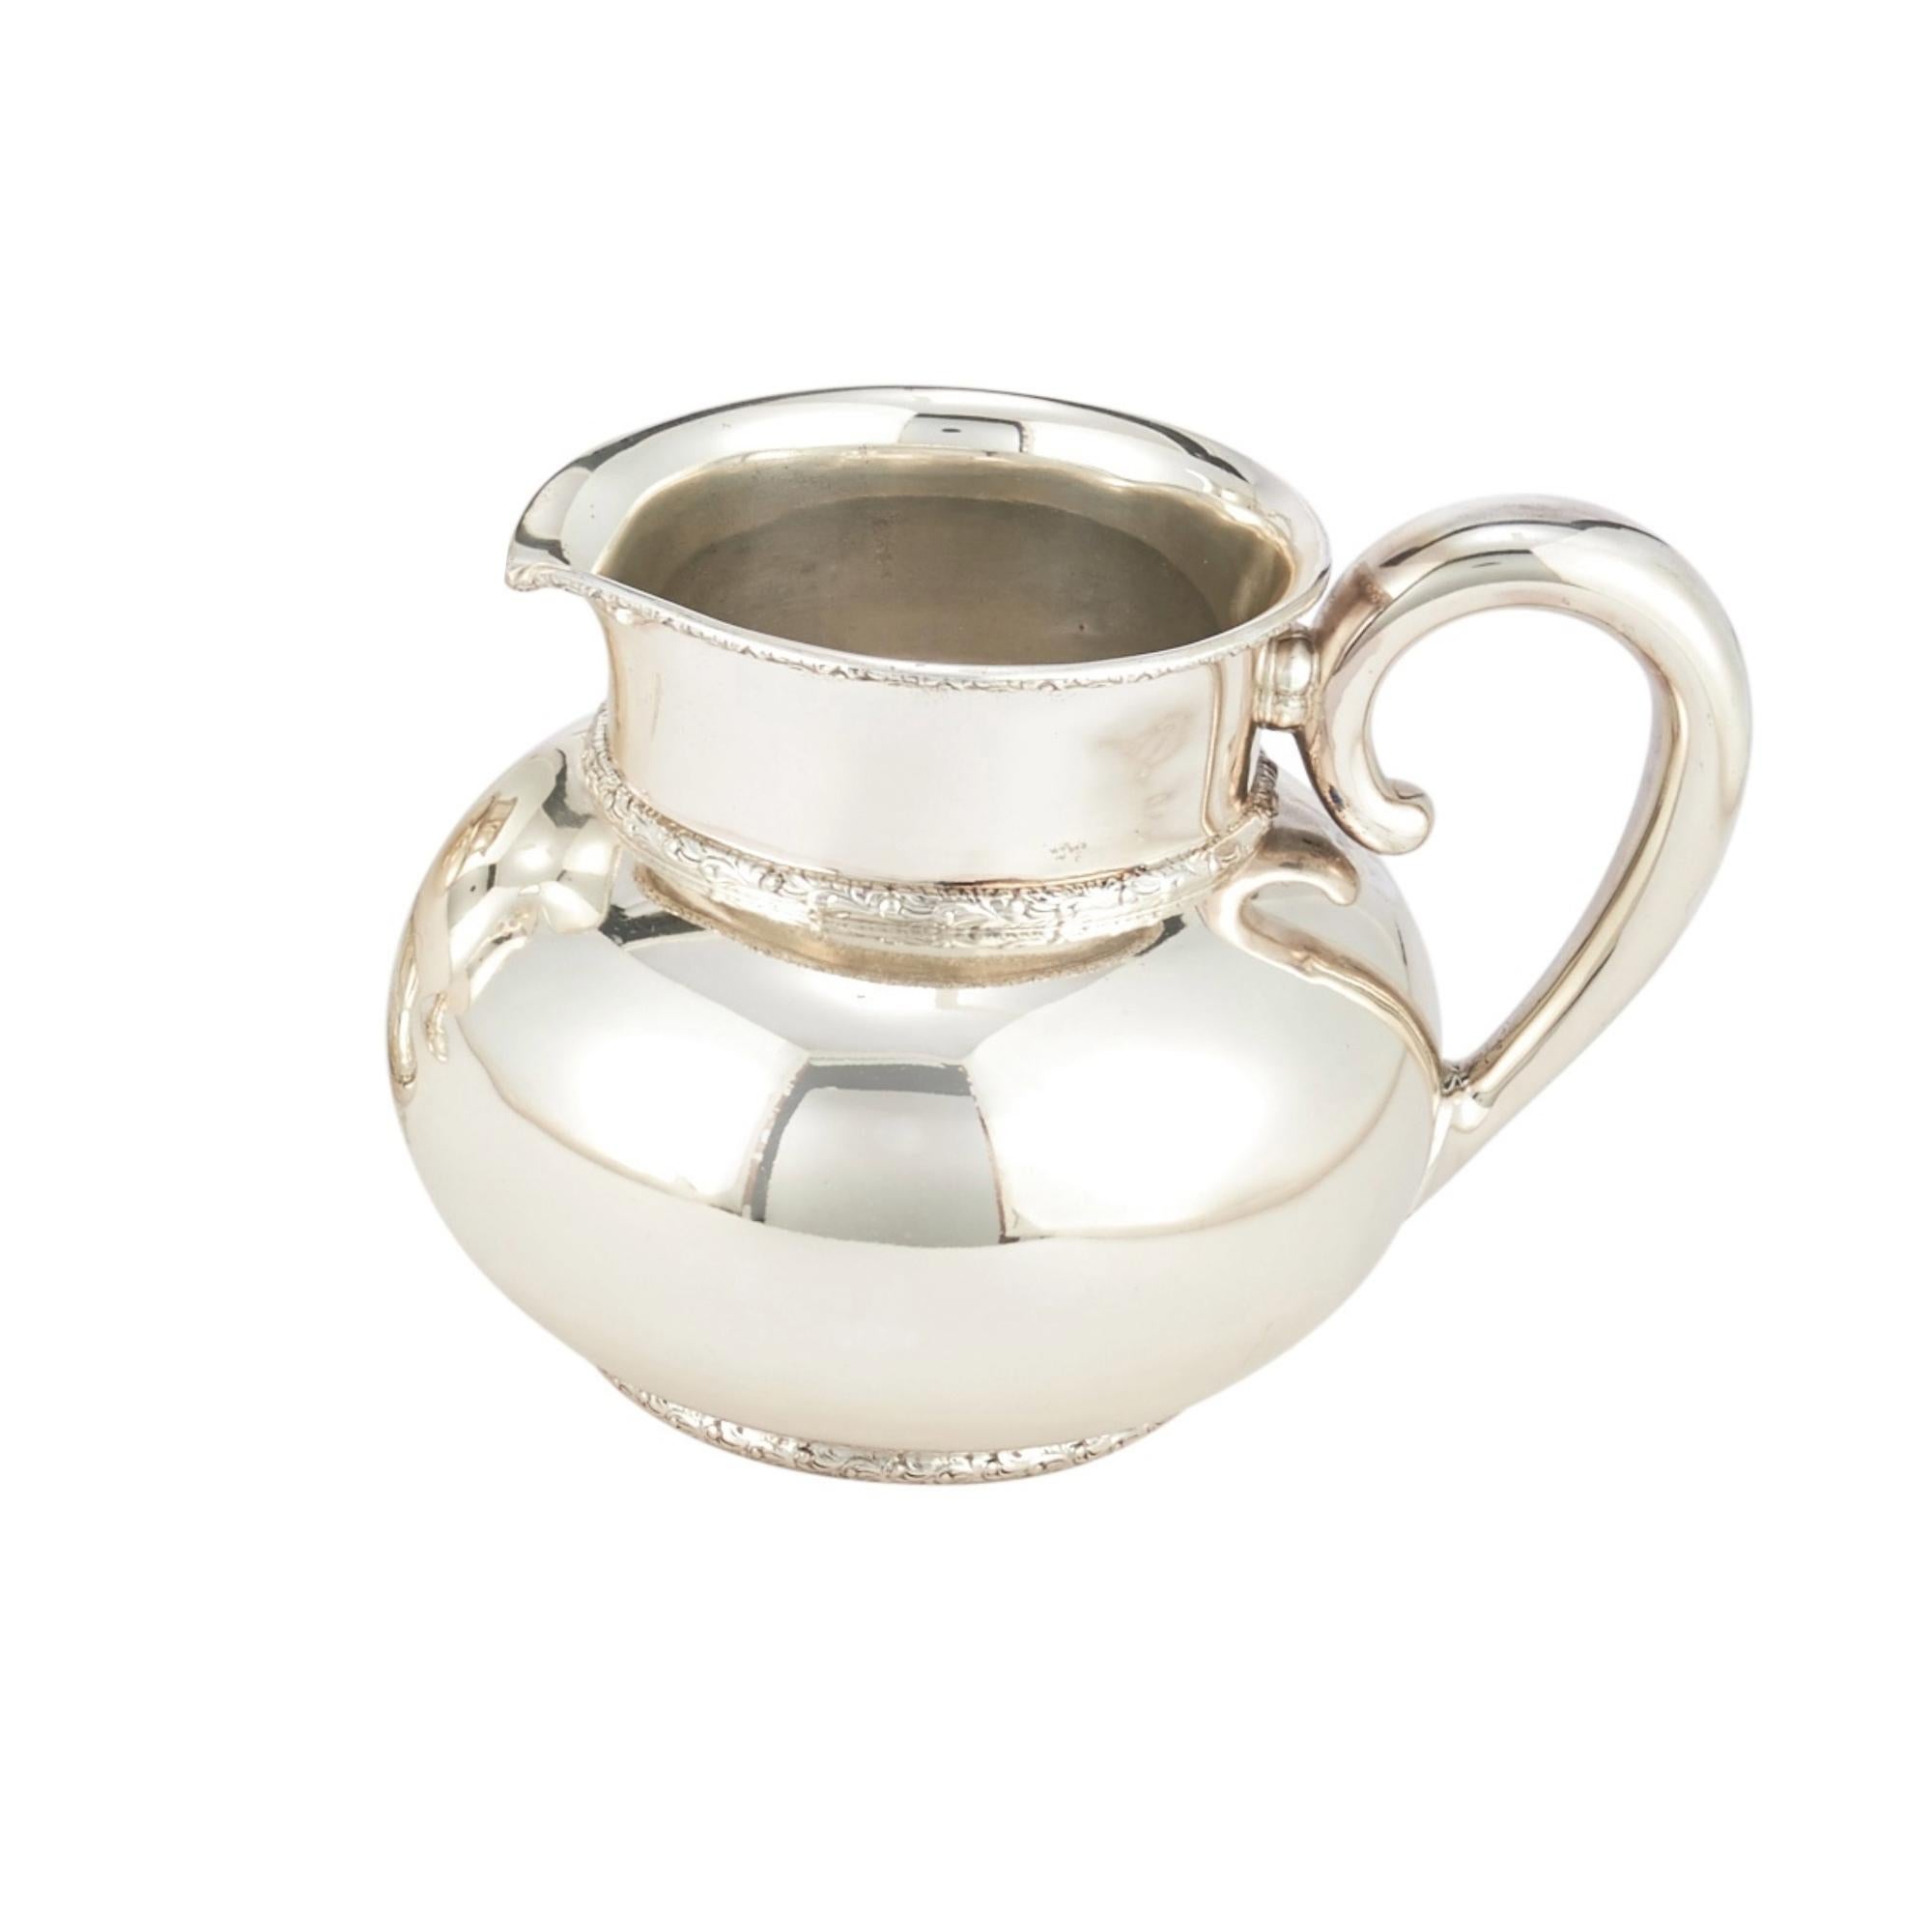 Early 20th Century Sterling Silver Tableware Serveware Pitcher For Sale 4